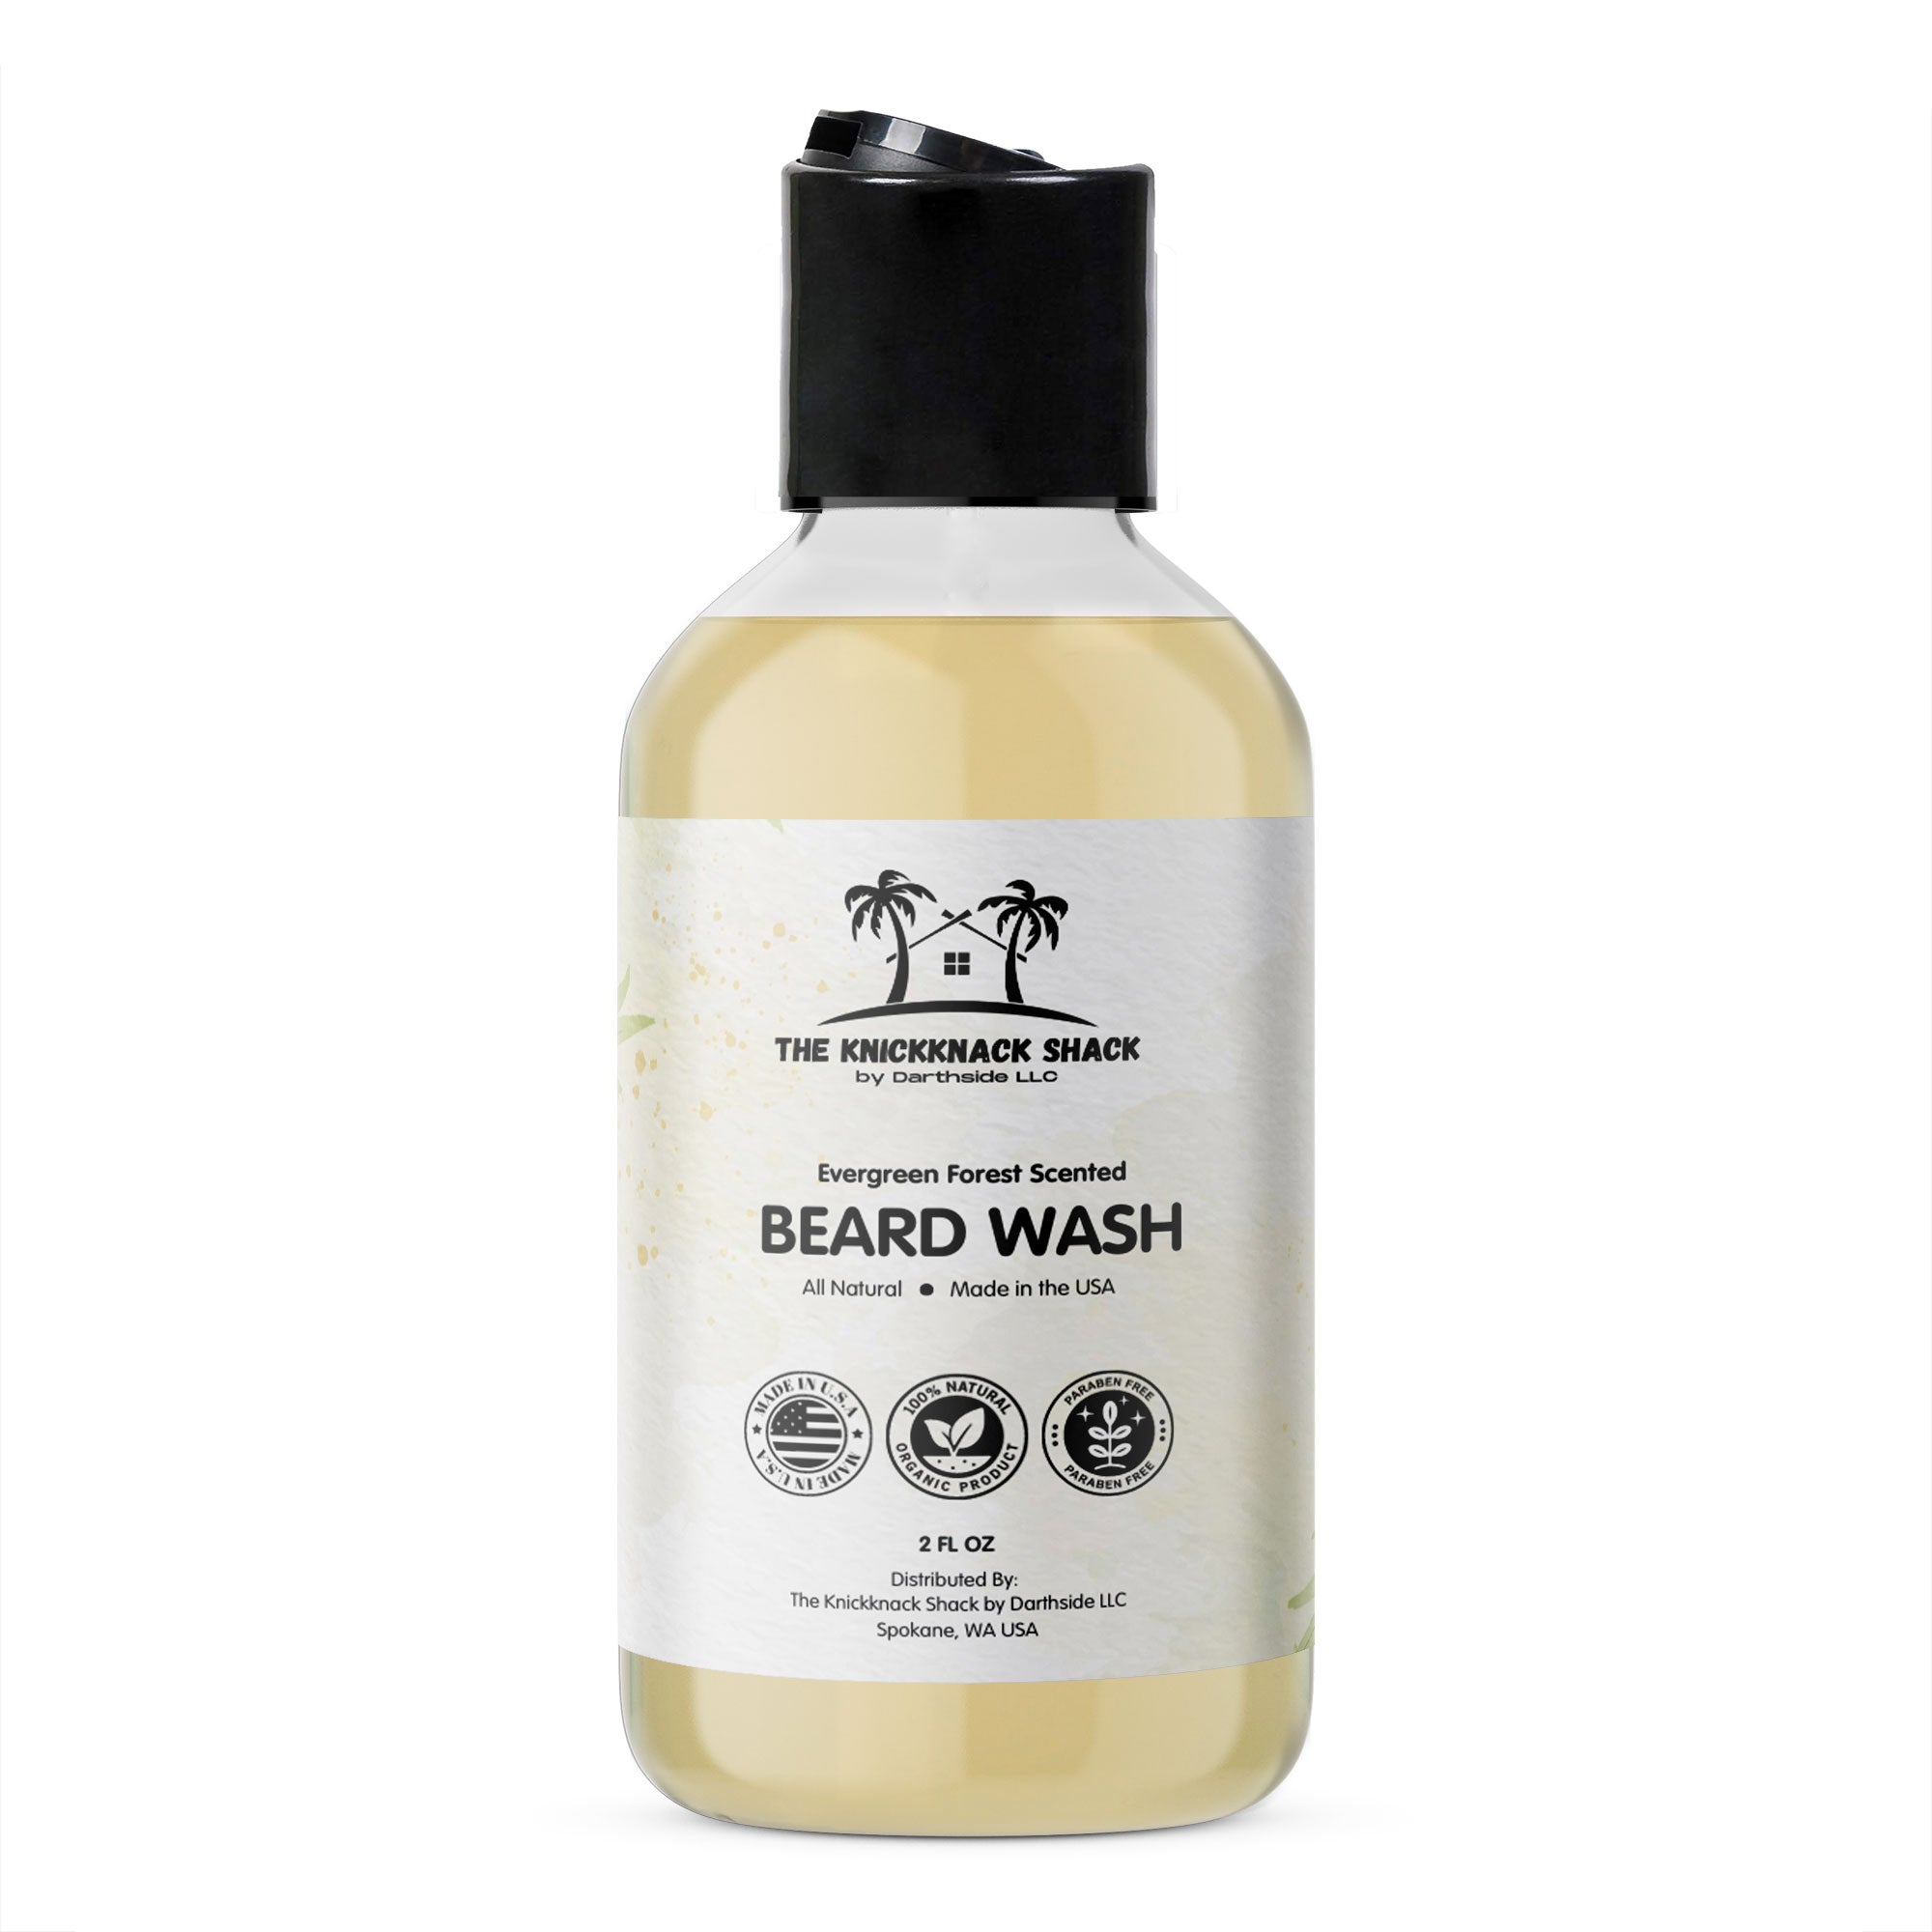 Evergreen Forest Scented Beard Wash